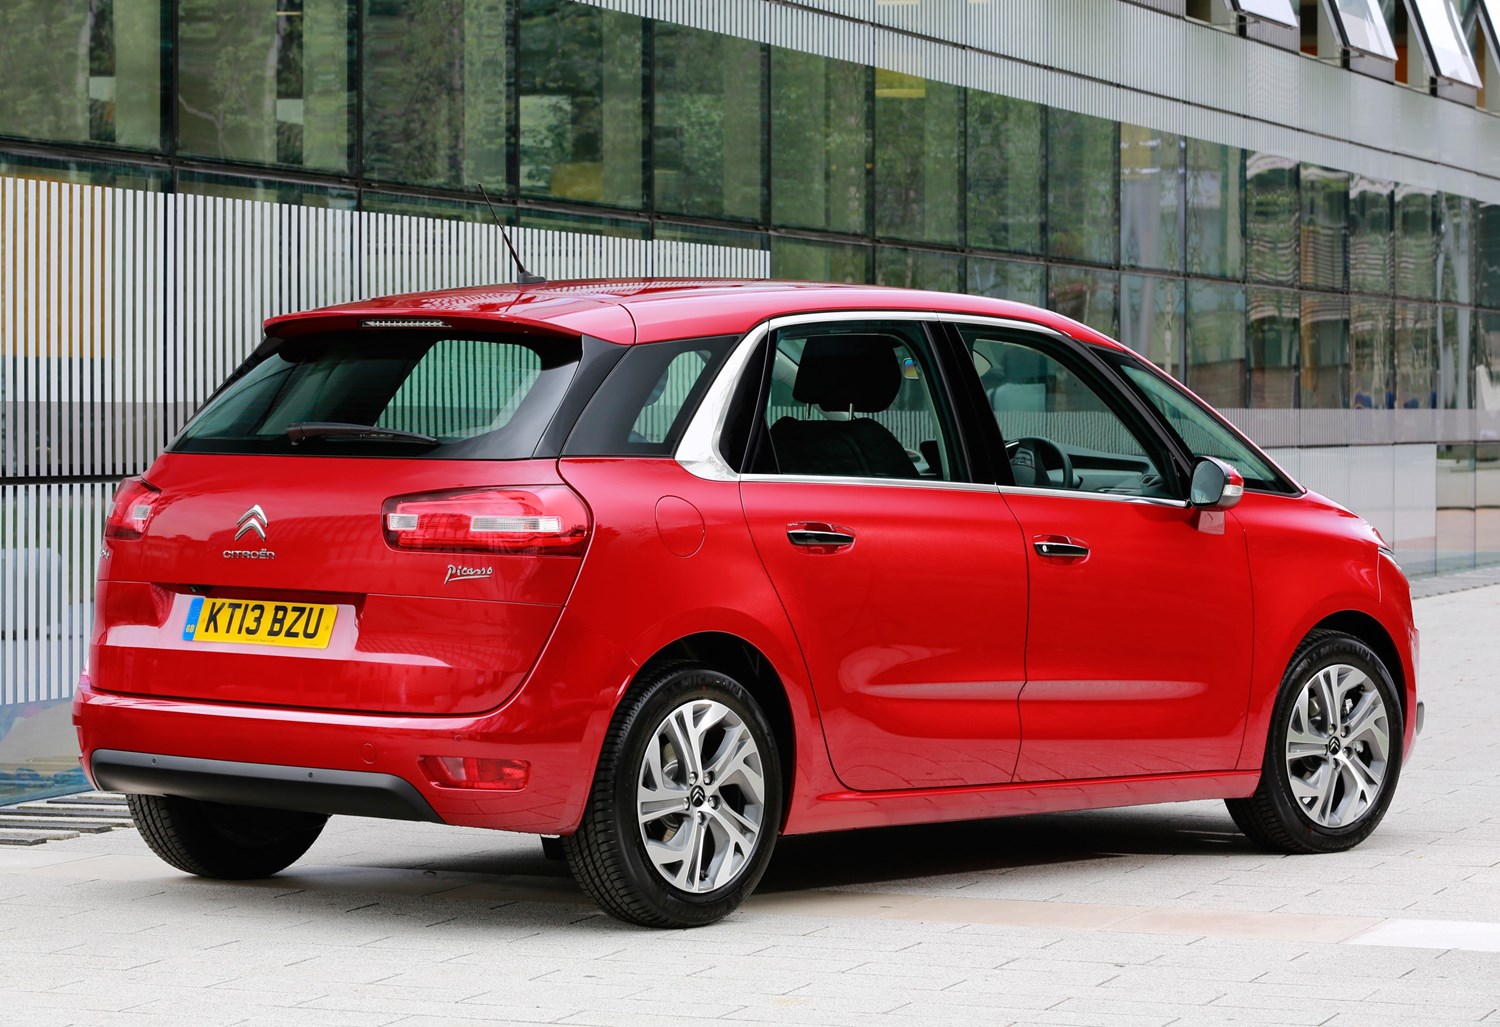 Used Citroen C4 Picasso (Mk2, 2013-2022) review